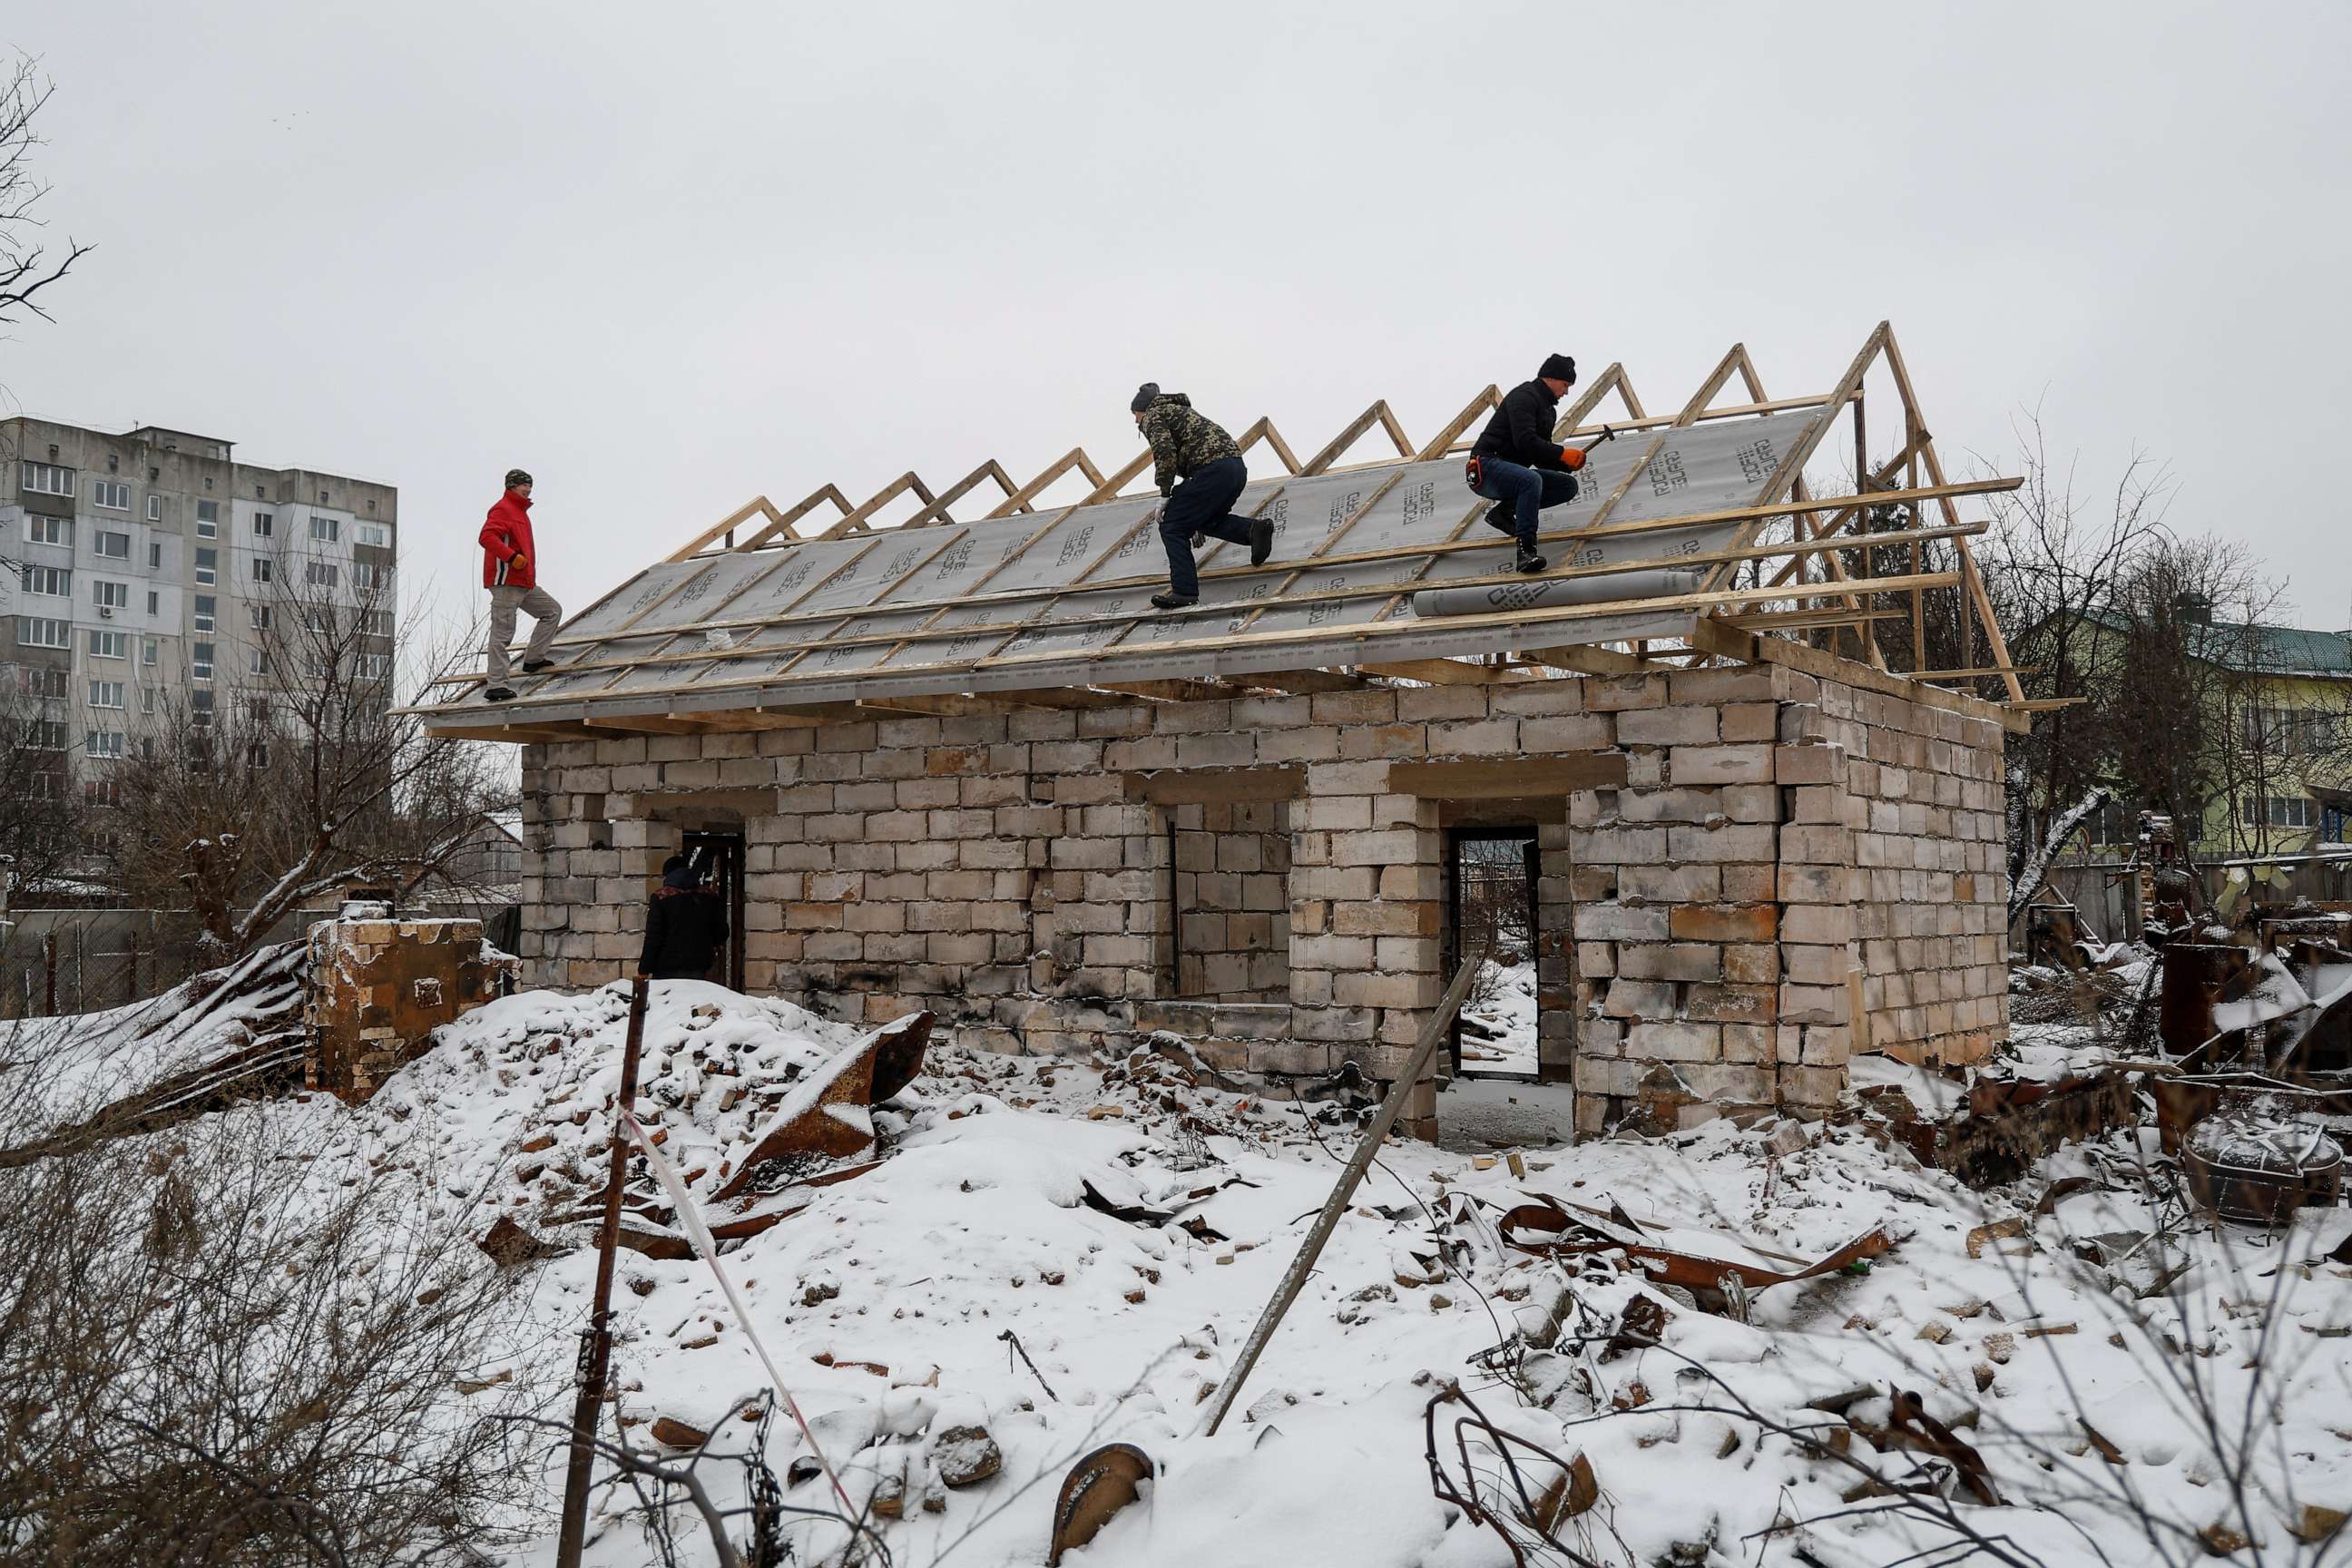 PHOTO: Workers repair a roof of a house heavily damaged in the beginning of Russia's attack on Ukraine, in the town of Borodyanka, Kyiv region, Ukraine, Dec. 15, 2022.